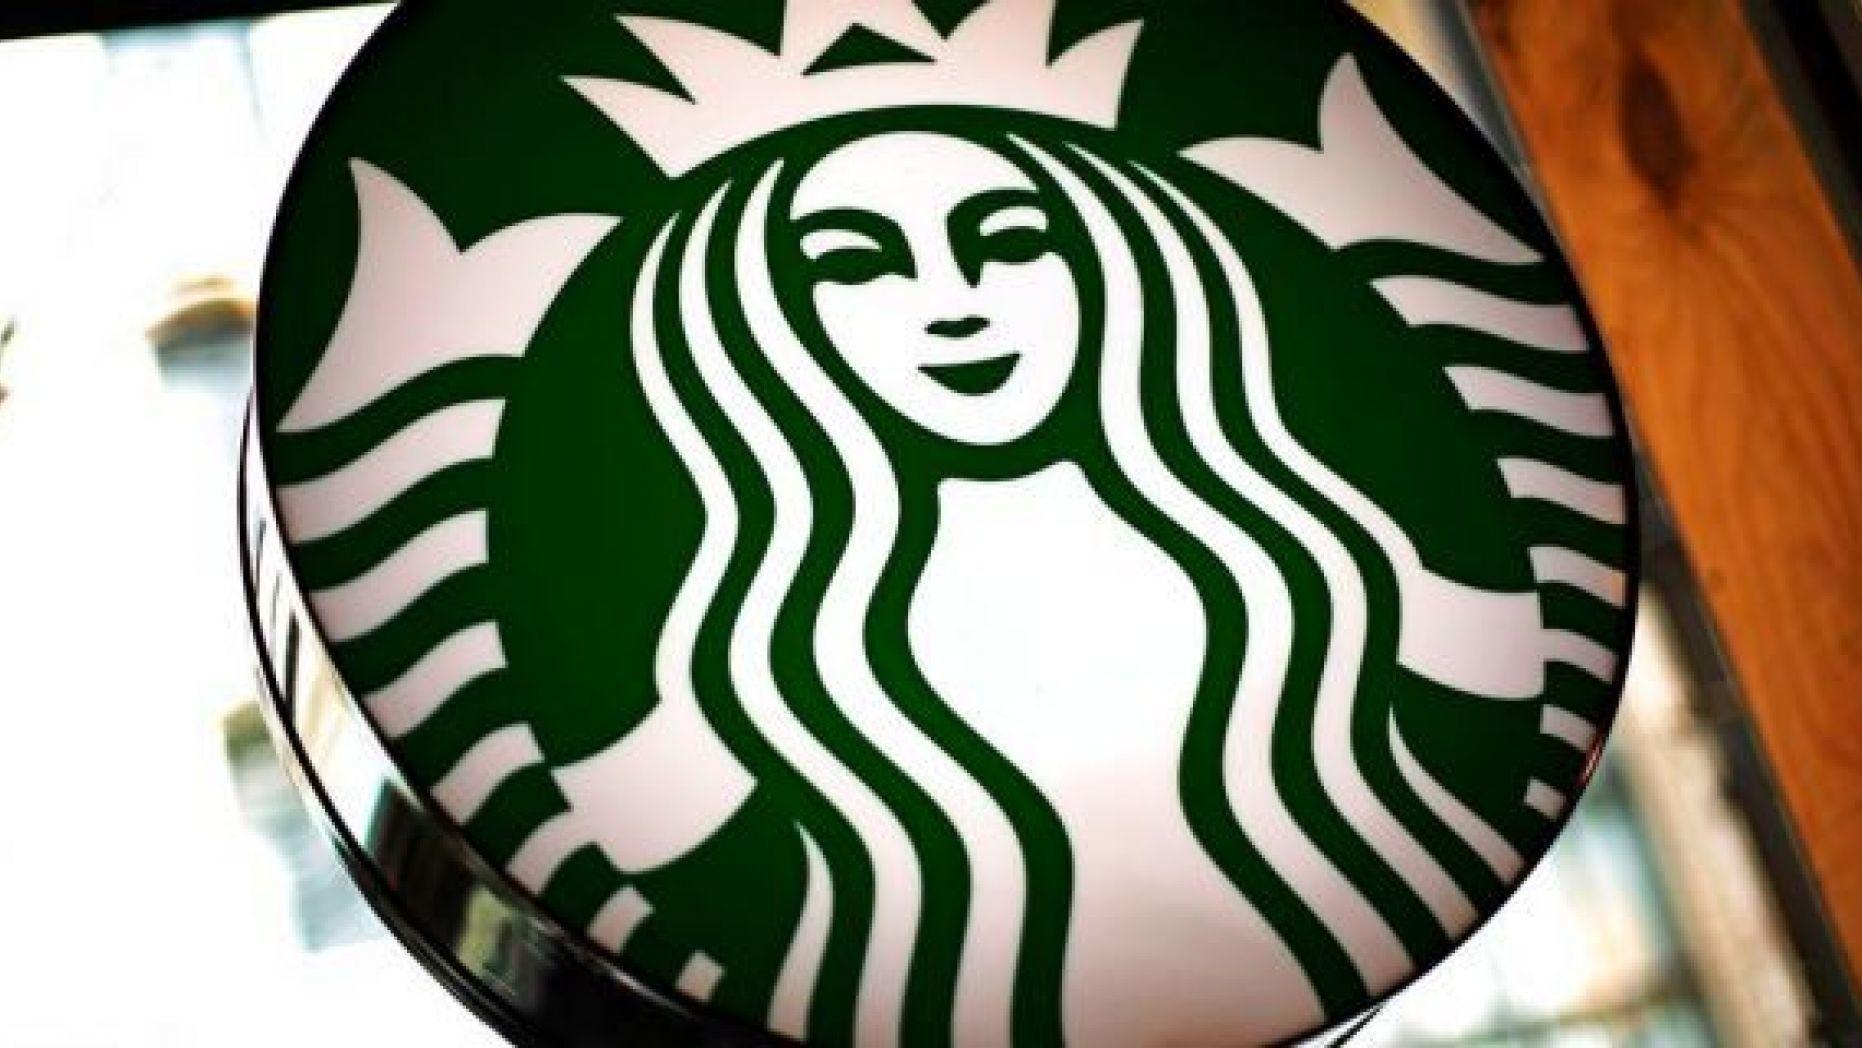 Fake Starbucks Logo - Fake coupons emerge after Starbucks incident in Philly